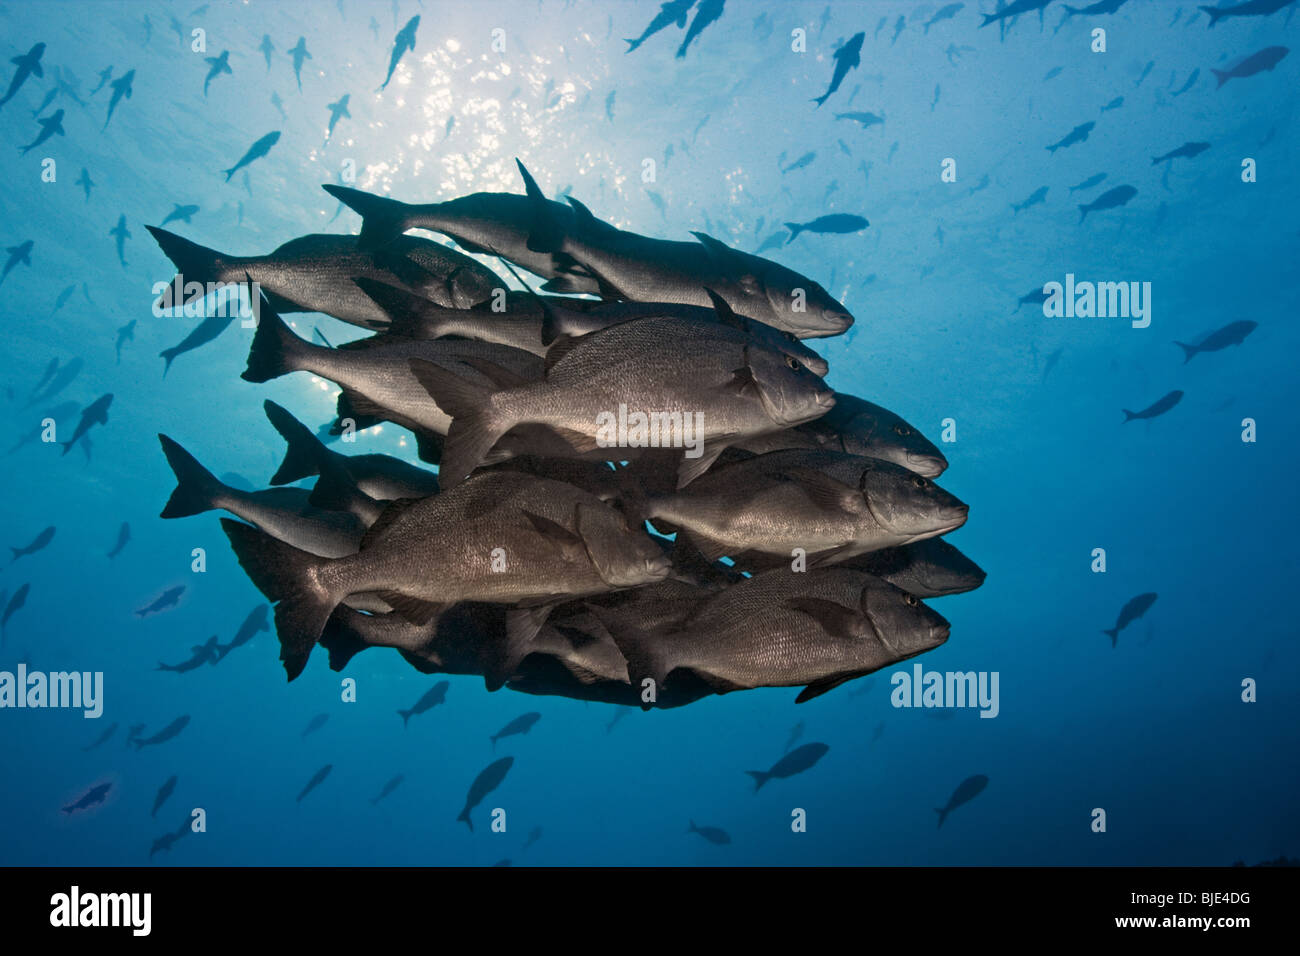 A group of Jackfish hang in the humboldt current by the reef edge in the Galapagos Archipelago. Stock Photo